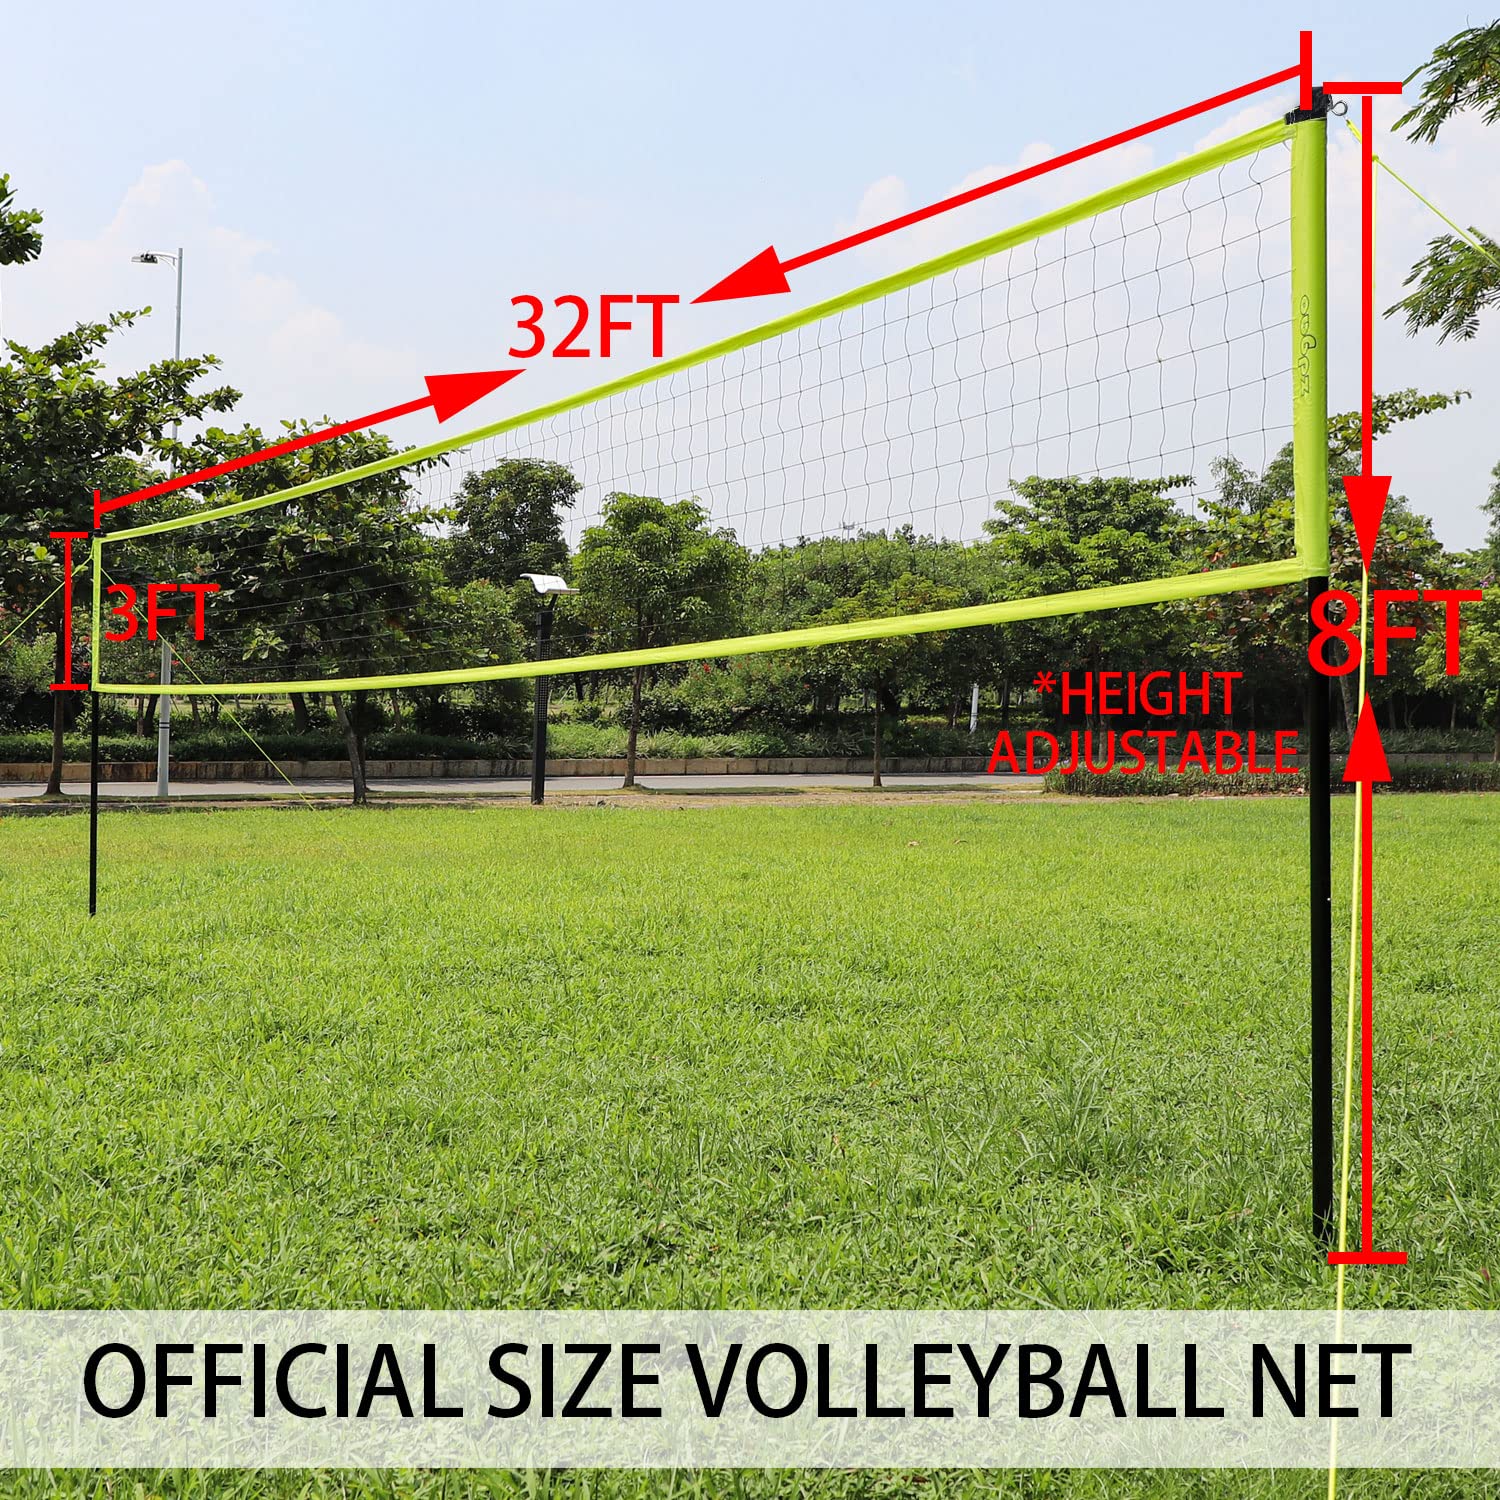 Zdgao Outdoor Portable Volleyball Net System - Adjustable Height Poles with Soft Volleyball Ball, Pump, Hammer, Boundary Line, and Car